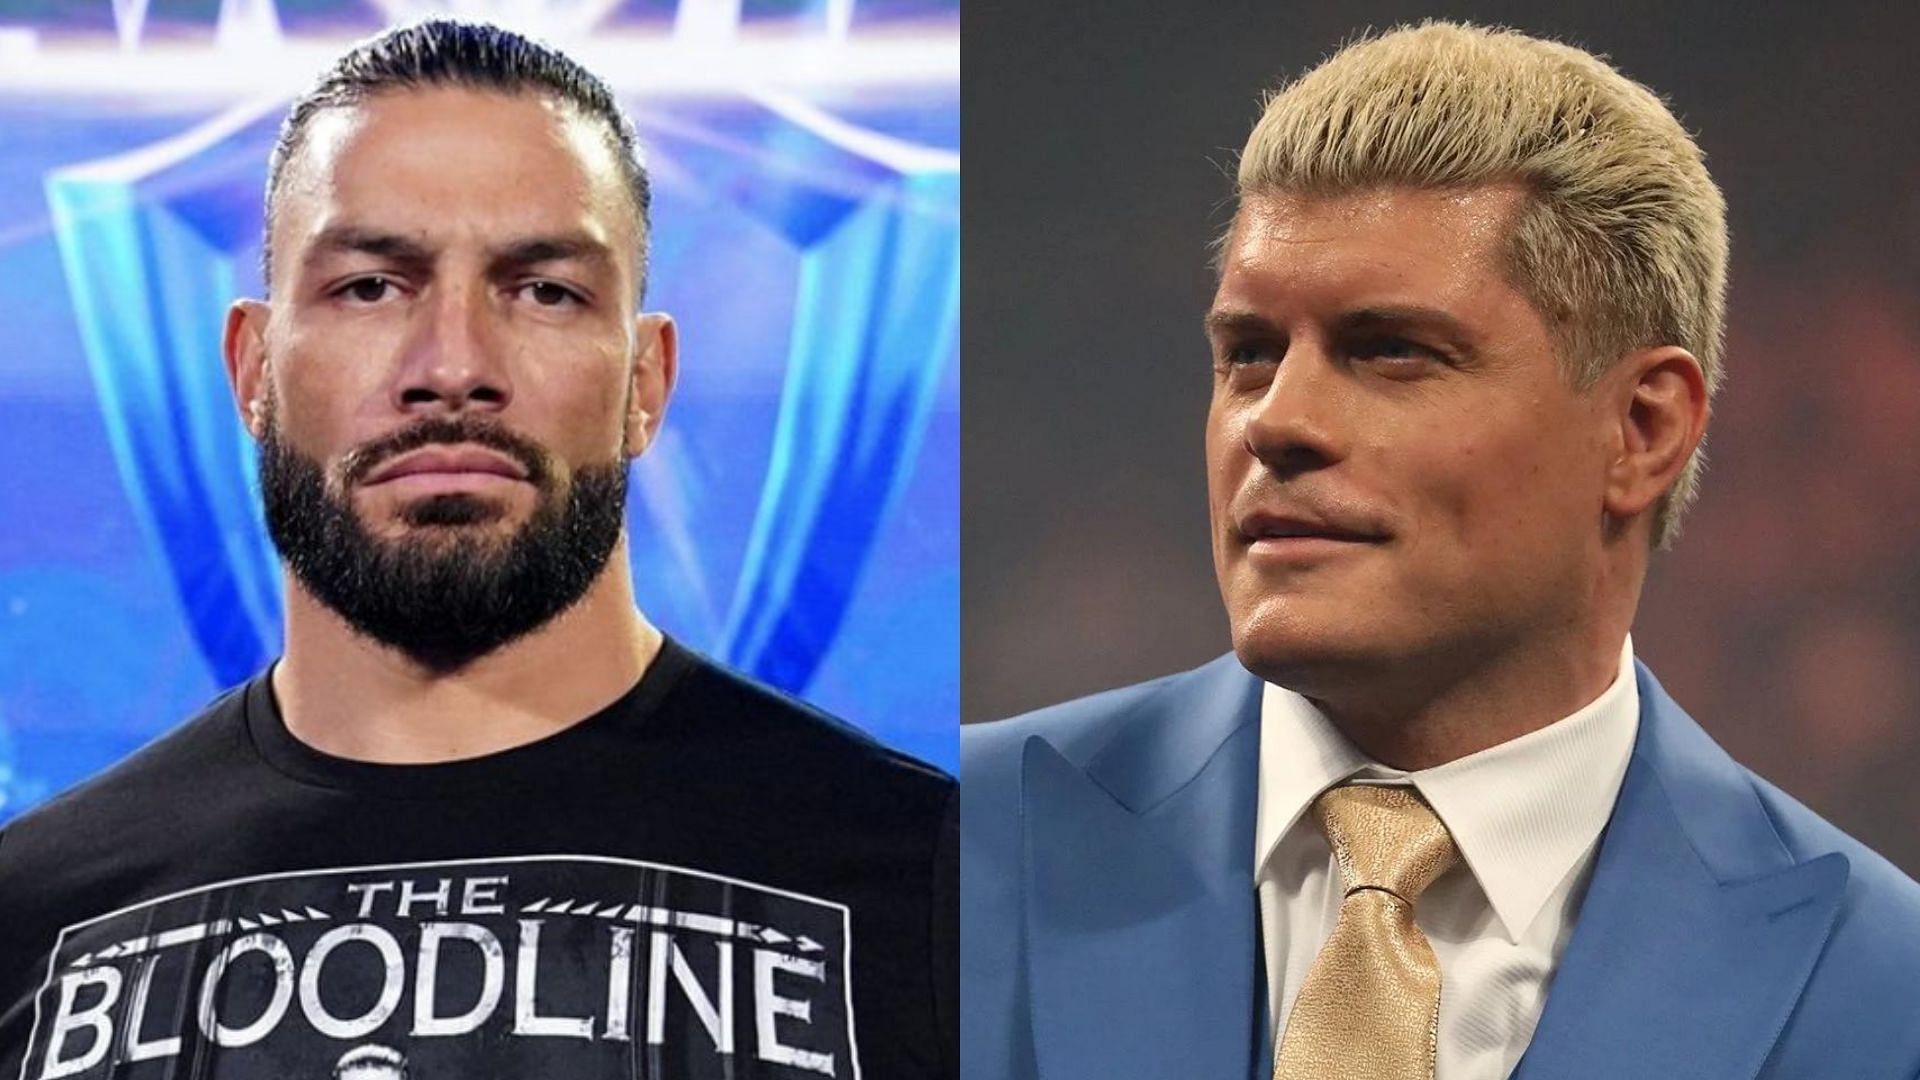 Roman Reigns and Cody Rhodes are set to collide at WrestleMania